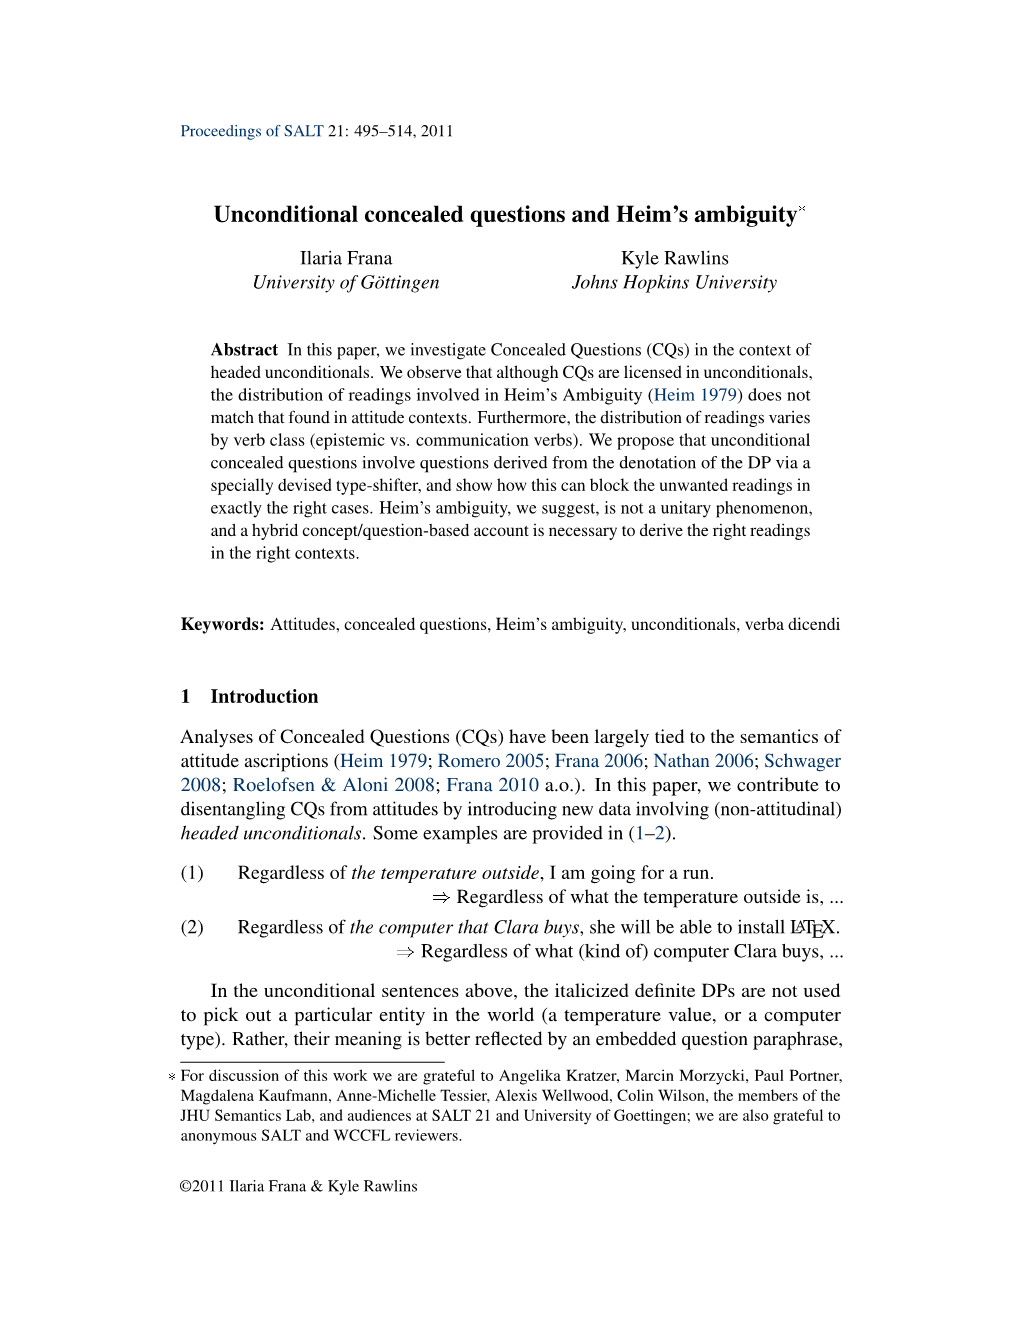 Unconditional Concealed Questions and the Nature of Heim's Ambiguity